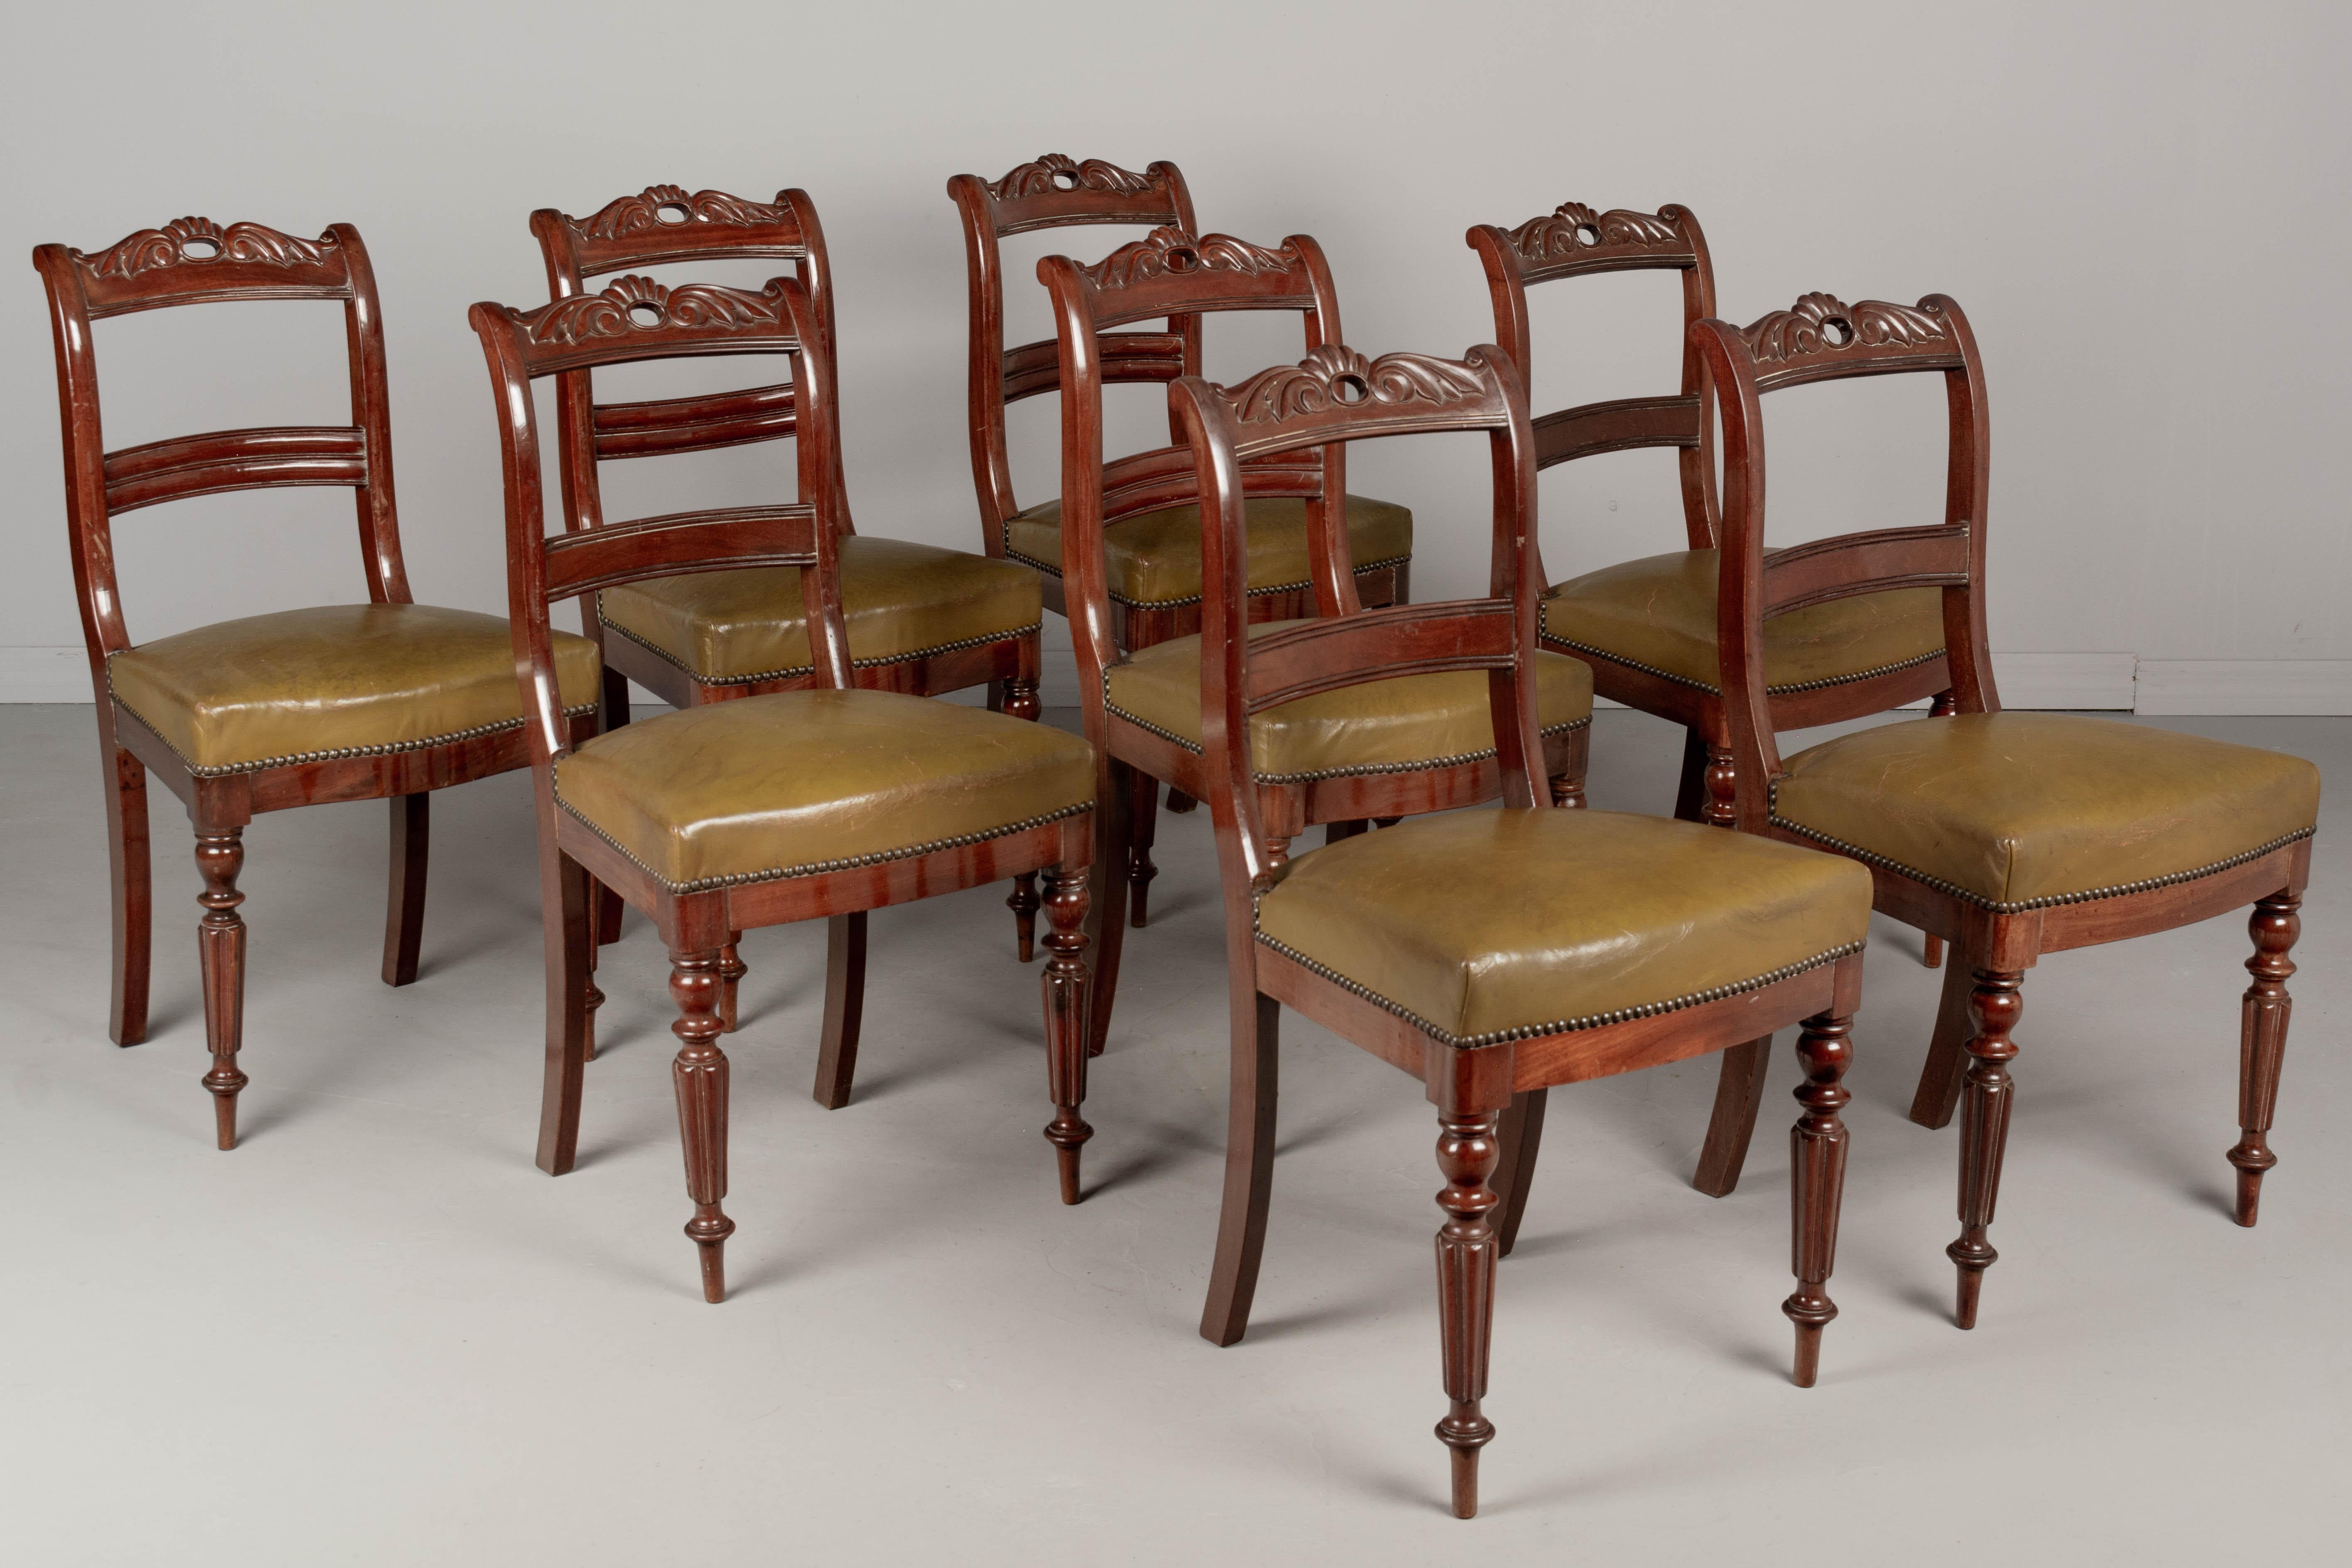 A set of eight English Regency style mahogany dining chairs, nicely detailed with turned fluted front legs and curved back with carved decoration. Sturdy and well constructed. Original leather upholstery with brass nail head trim. Leather with nice